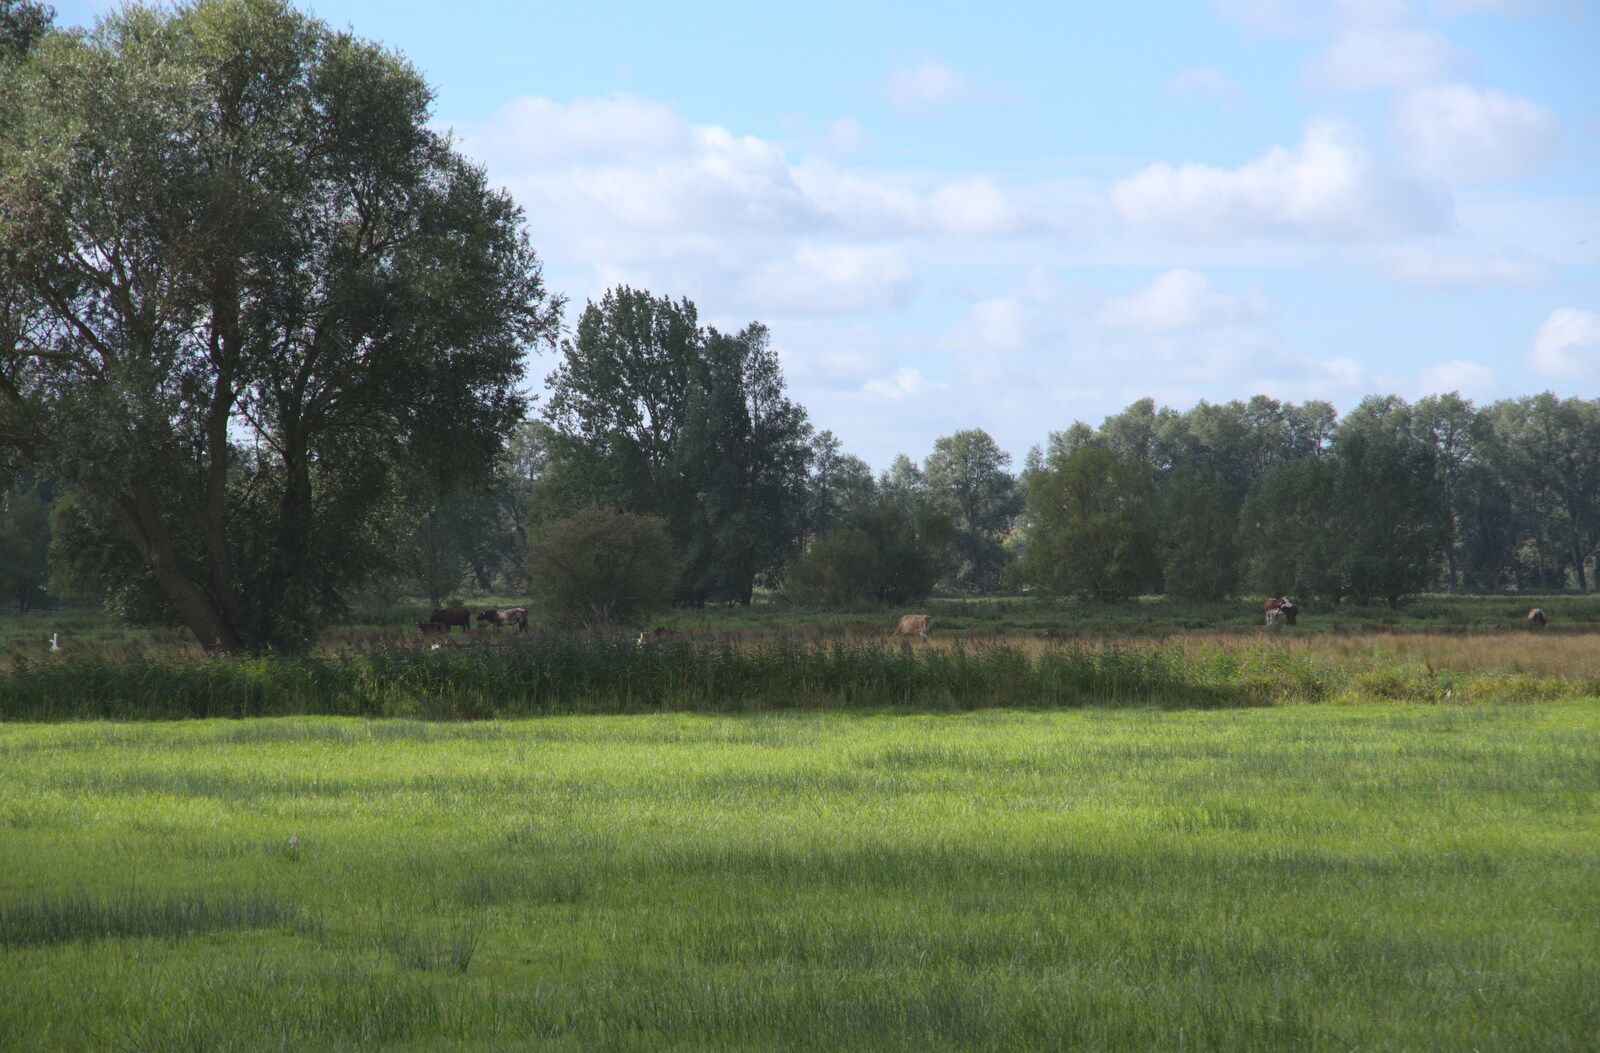 Camping at Three Rivers, Geldeston, Norfolk - 5th September 2020: A view over the meadows